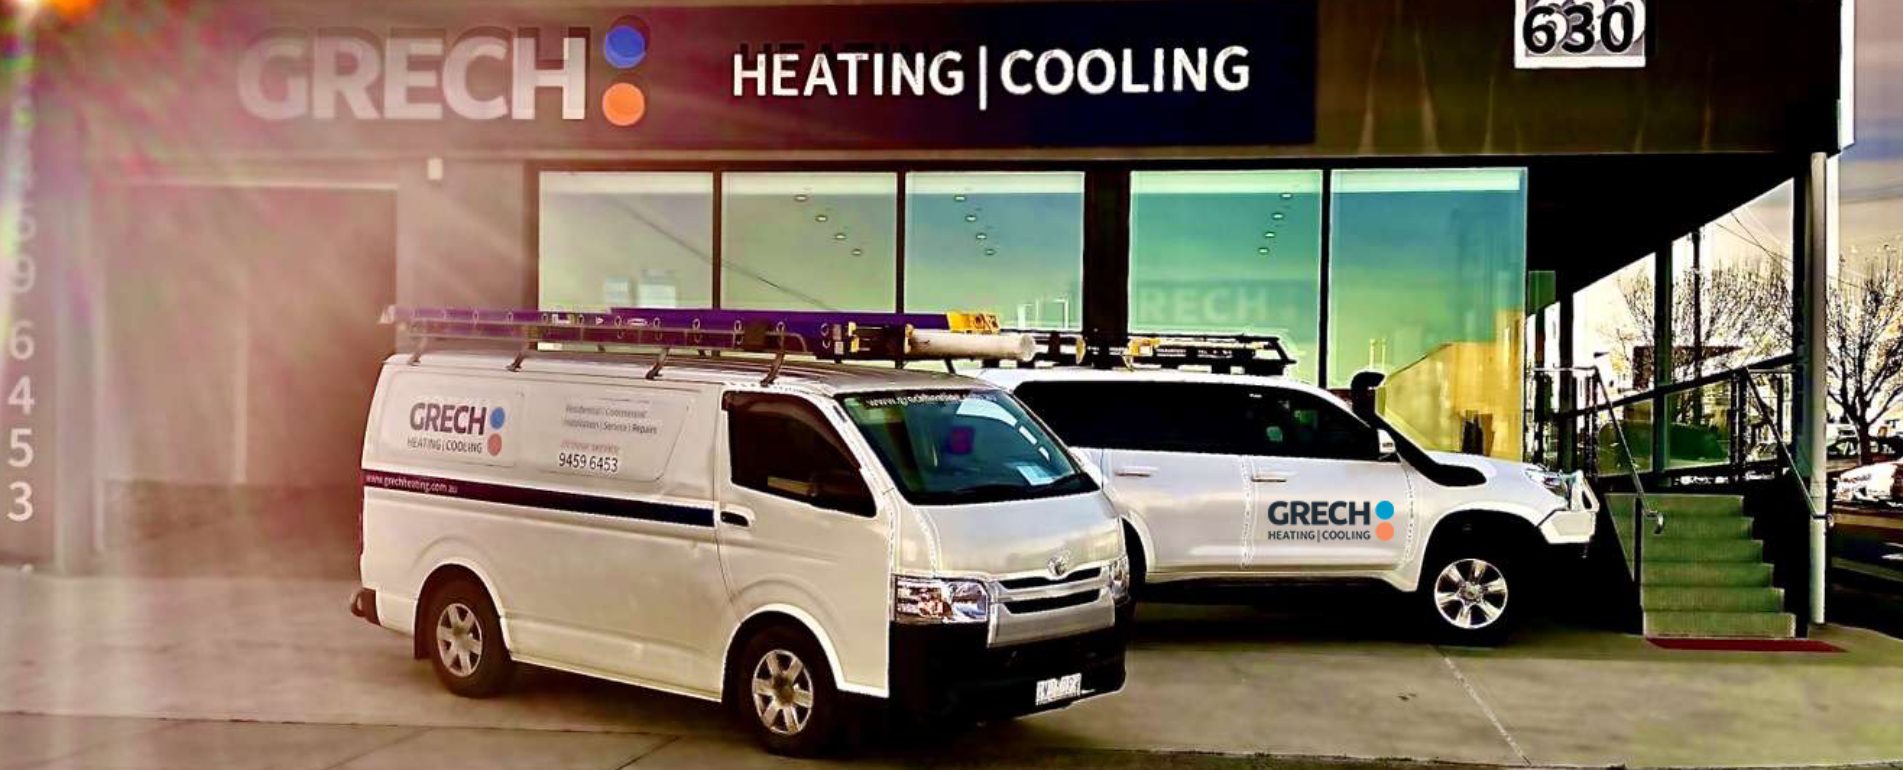 grech-heating-cooling